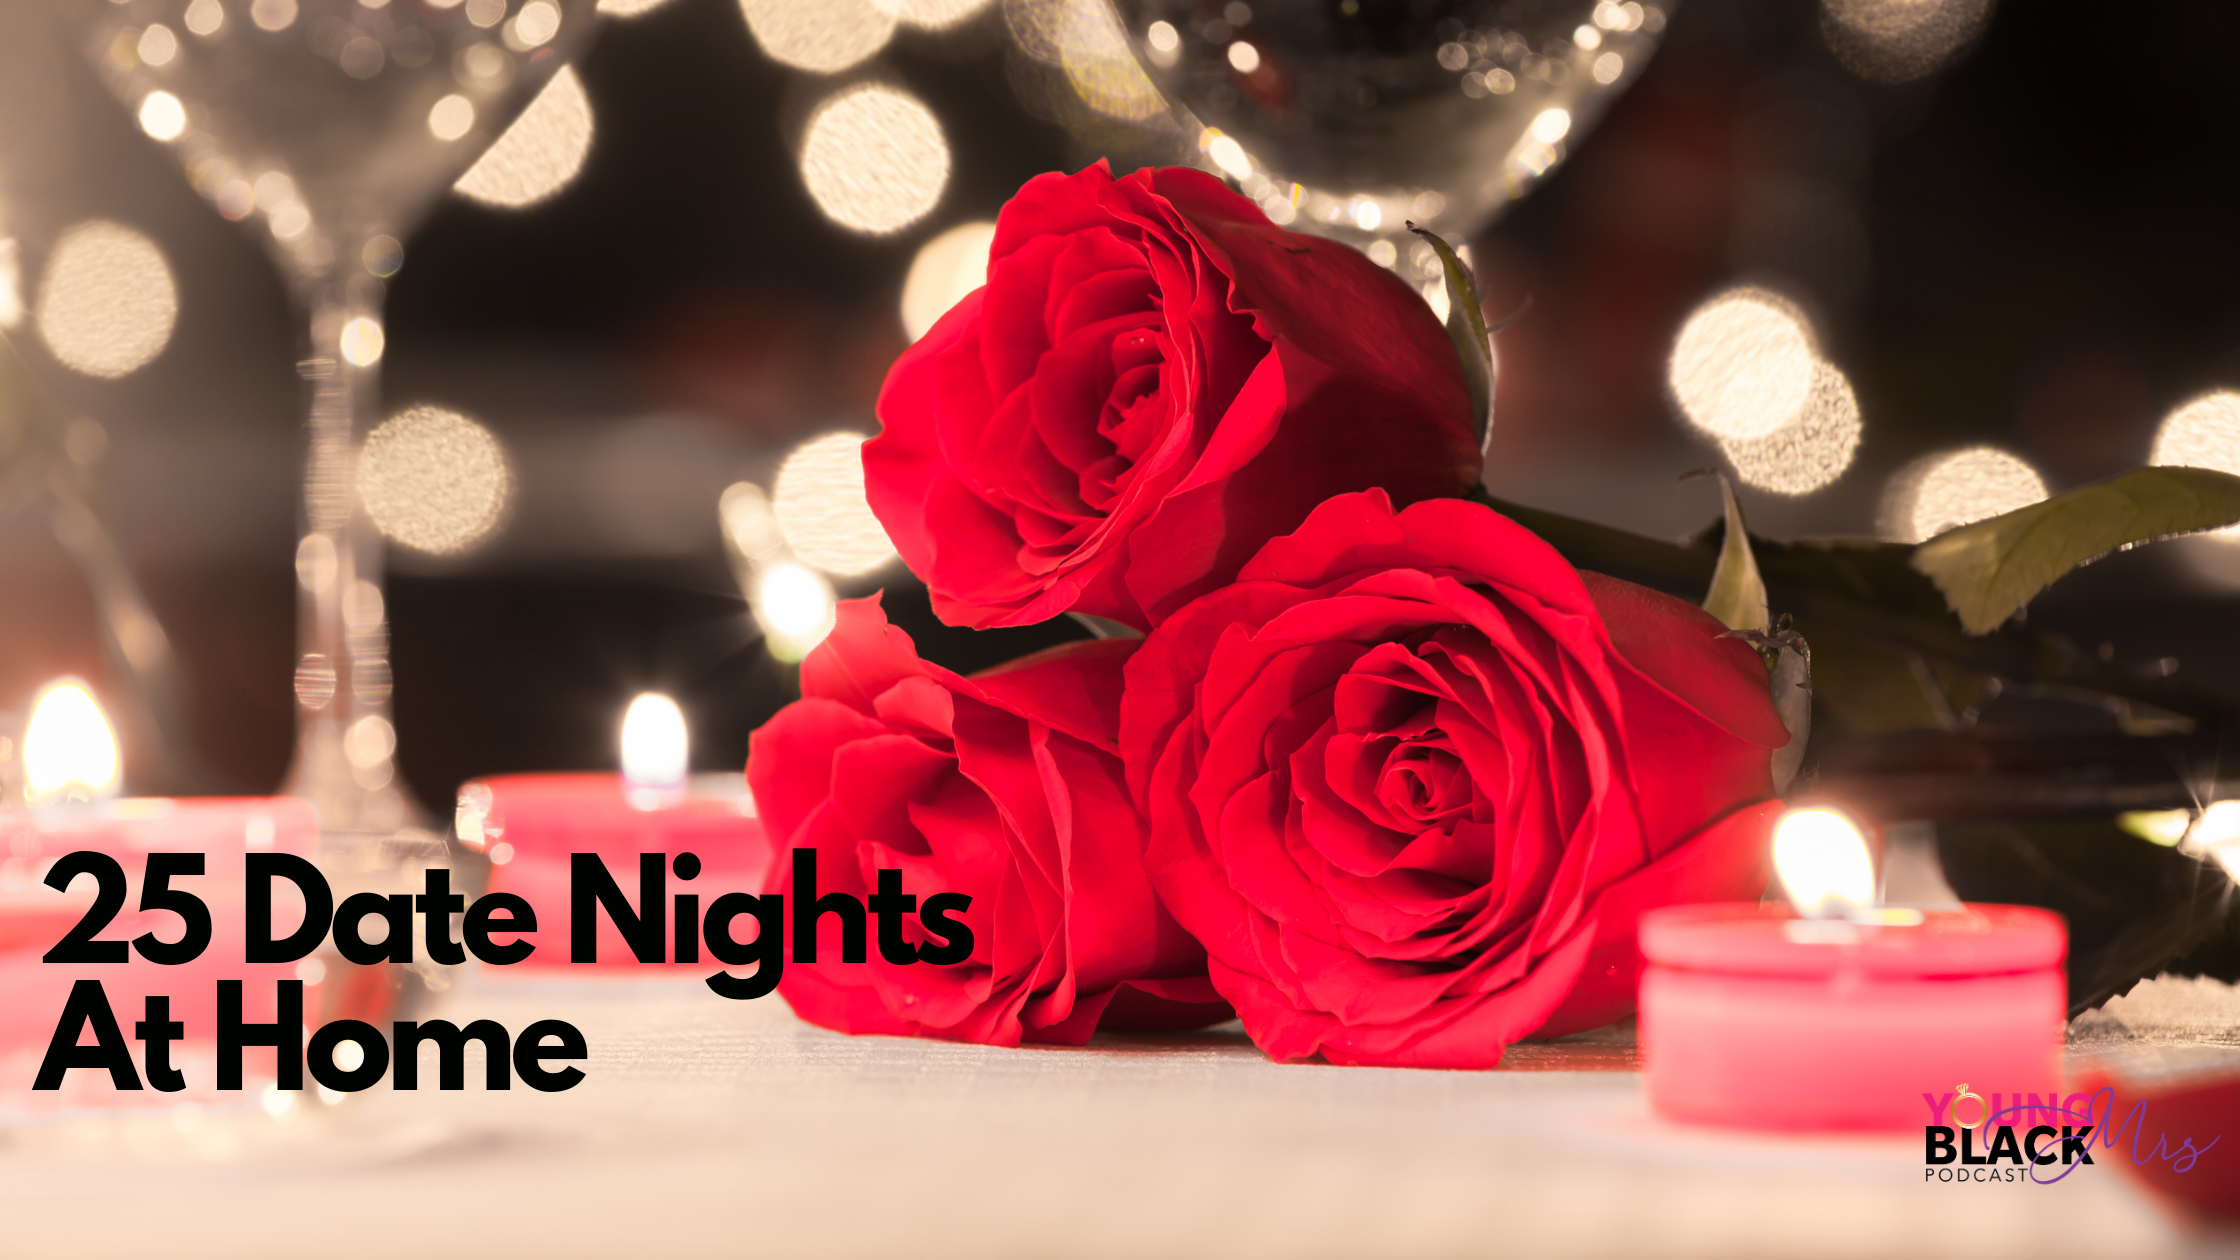 25 Date Nights At Home